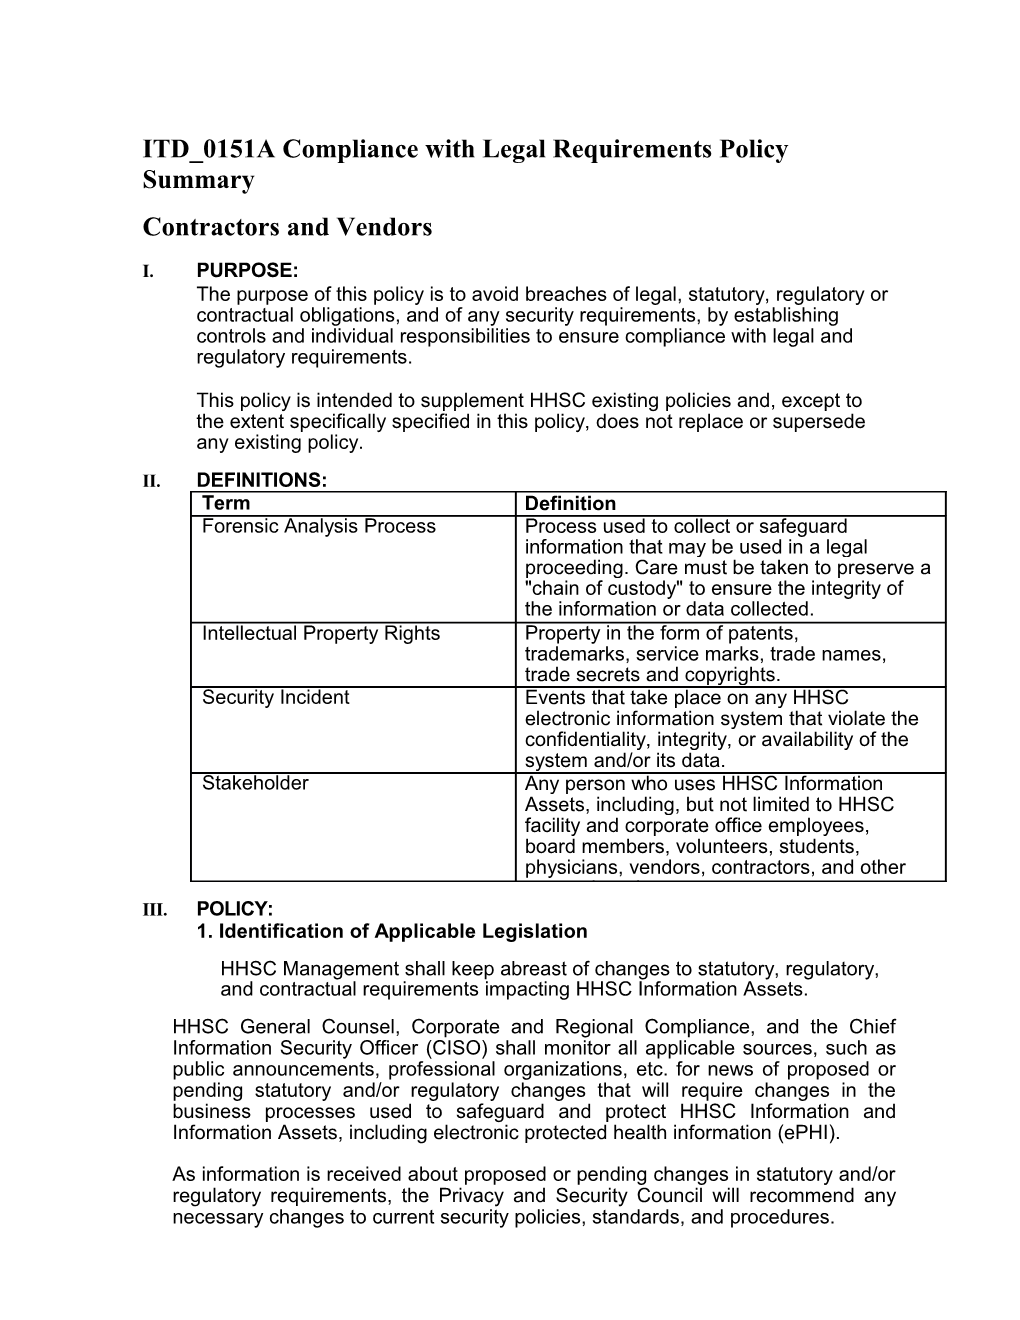 ITD 0151A Compliance with Legal Requirements Policy Summary